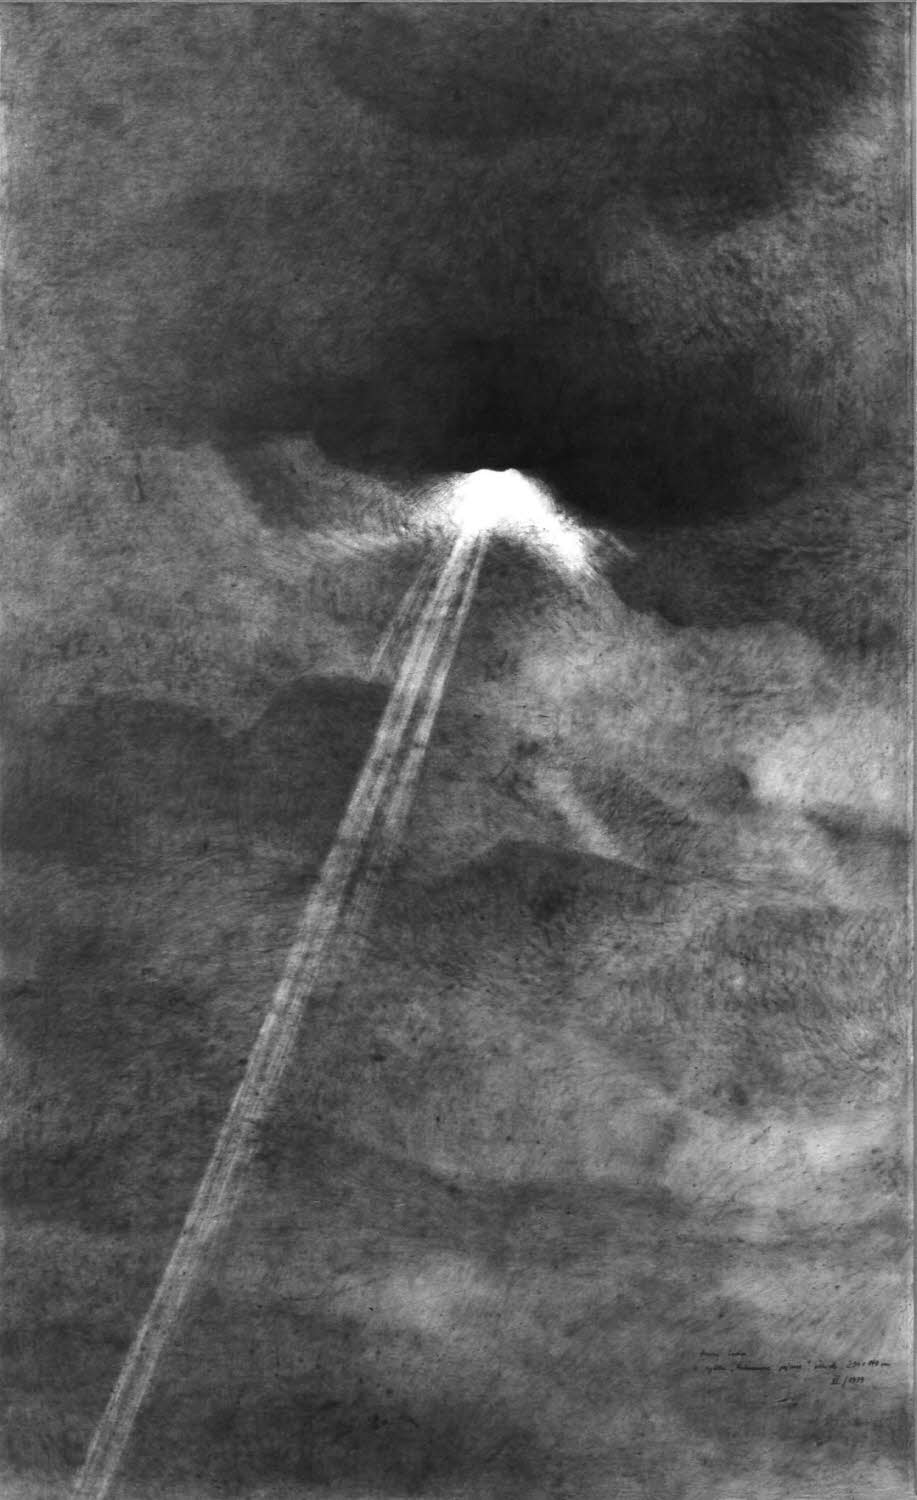 16 Shine from Cloudy Landscape, 1979, graphite on texture paper, 90x55 inches